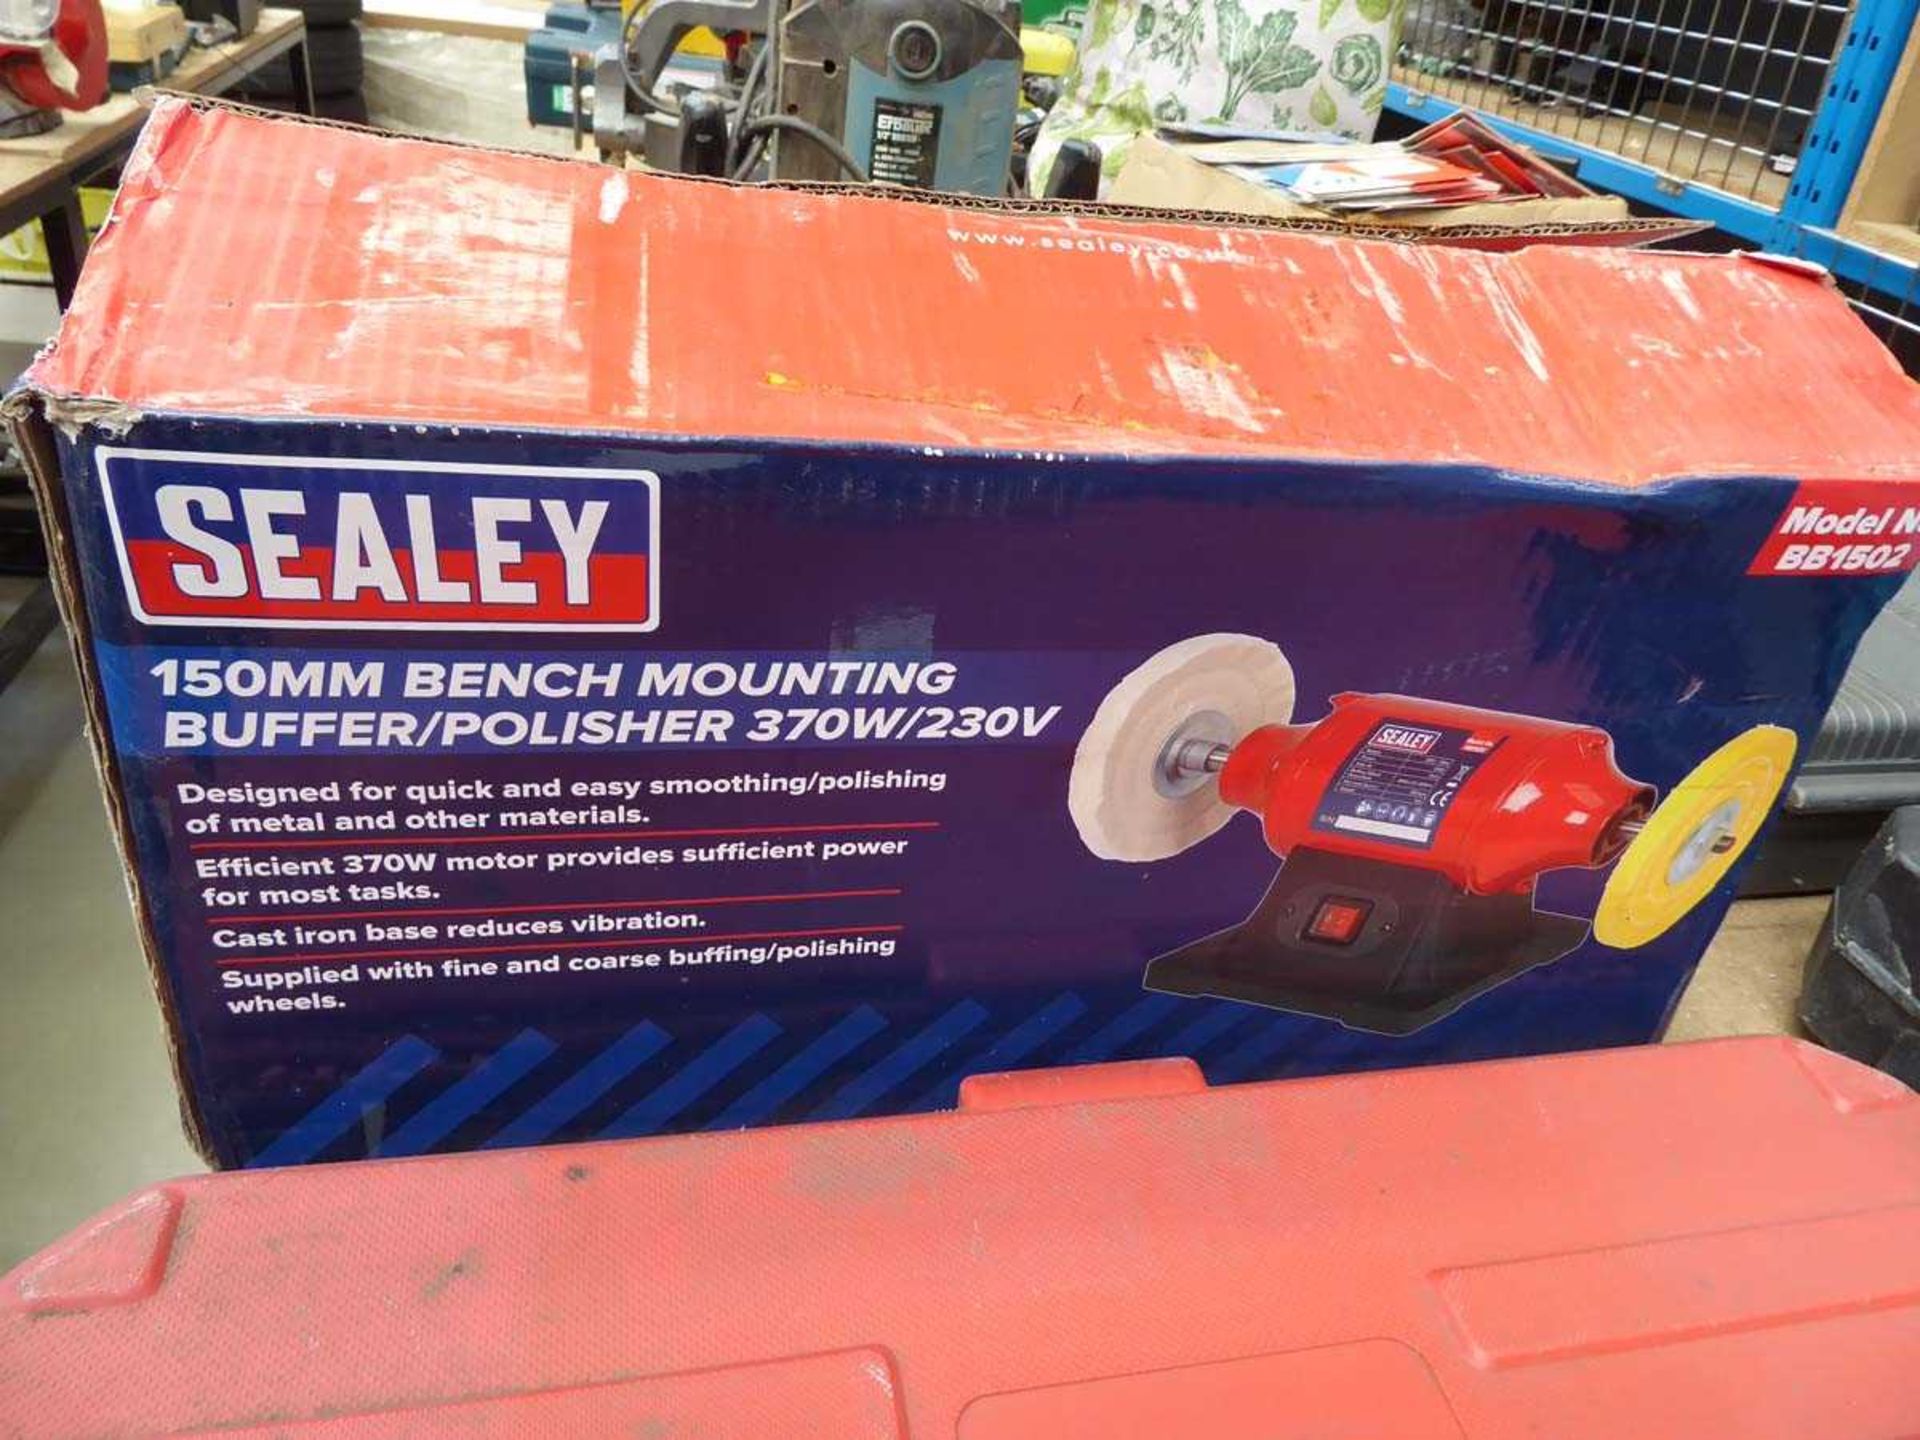 Boxed Sealey double ended polisher